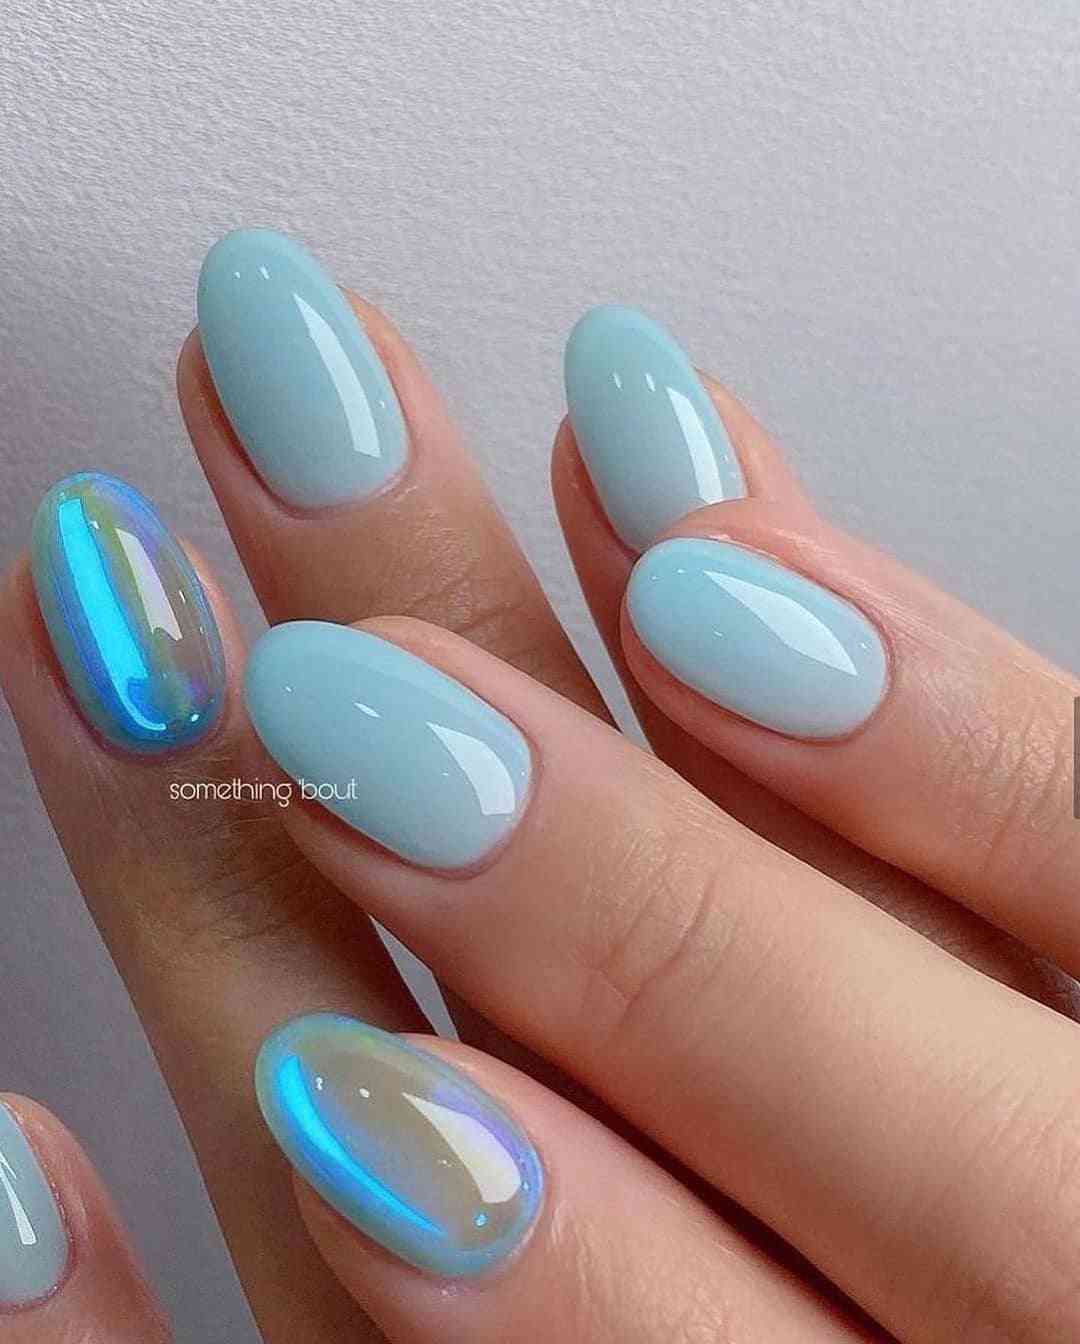 The 100+ Best Nail Designs Trends And Ideas In 2021 images 75